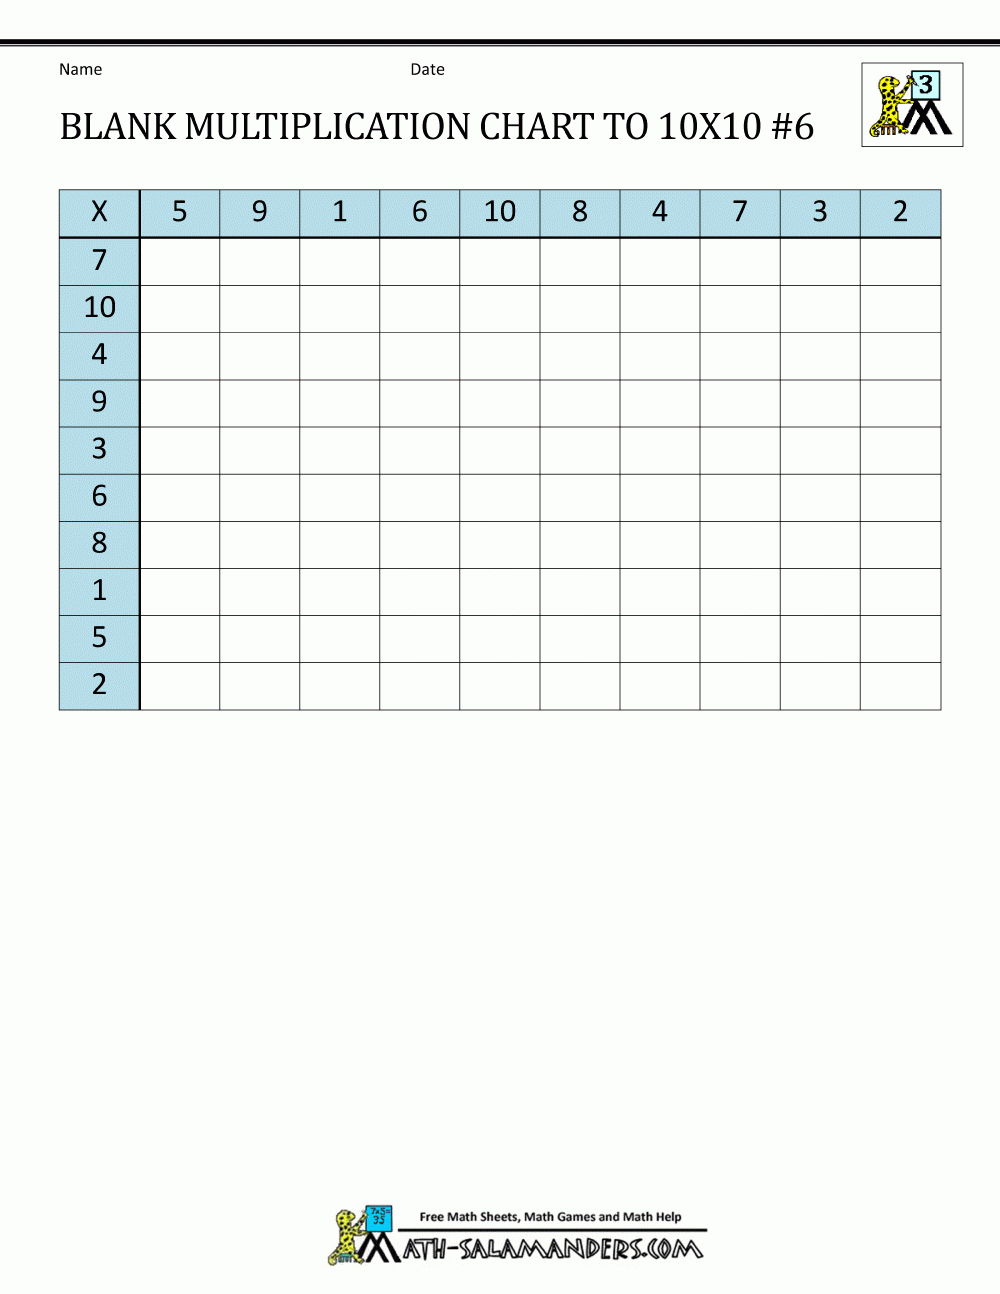 Blank Multiplication Chart Up To 10X10 intended for Printable Empty Multiplication Table